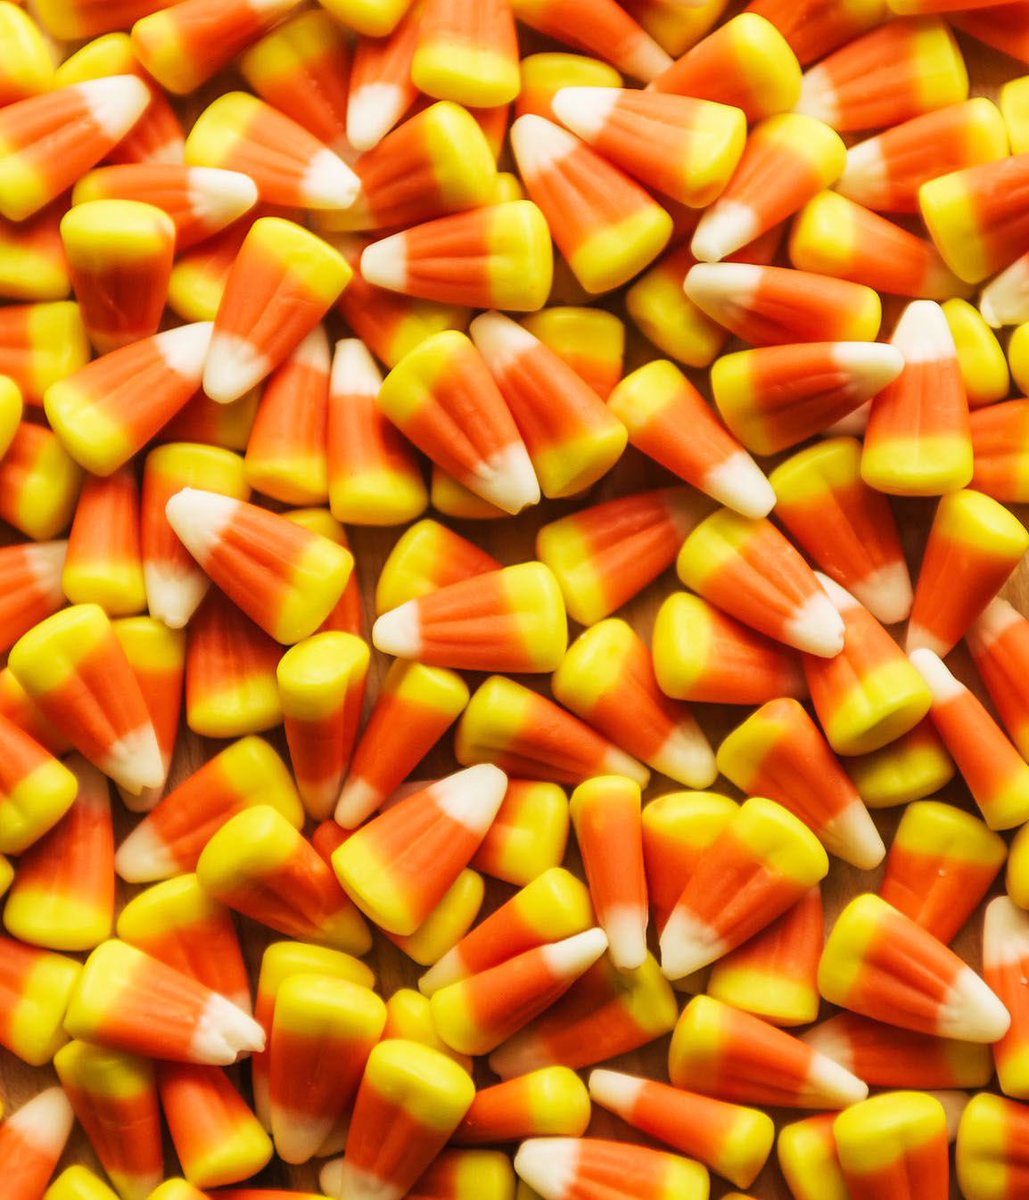 paul diskant (street kings)radiates candy corn energy. whether that’s a good or bad thing I’ll leave up to you to decide